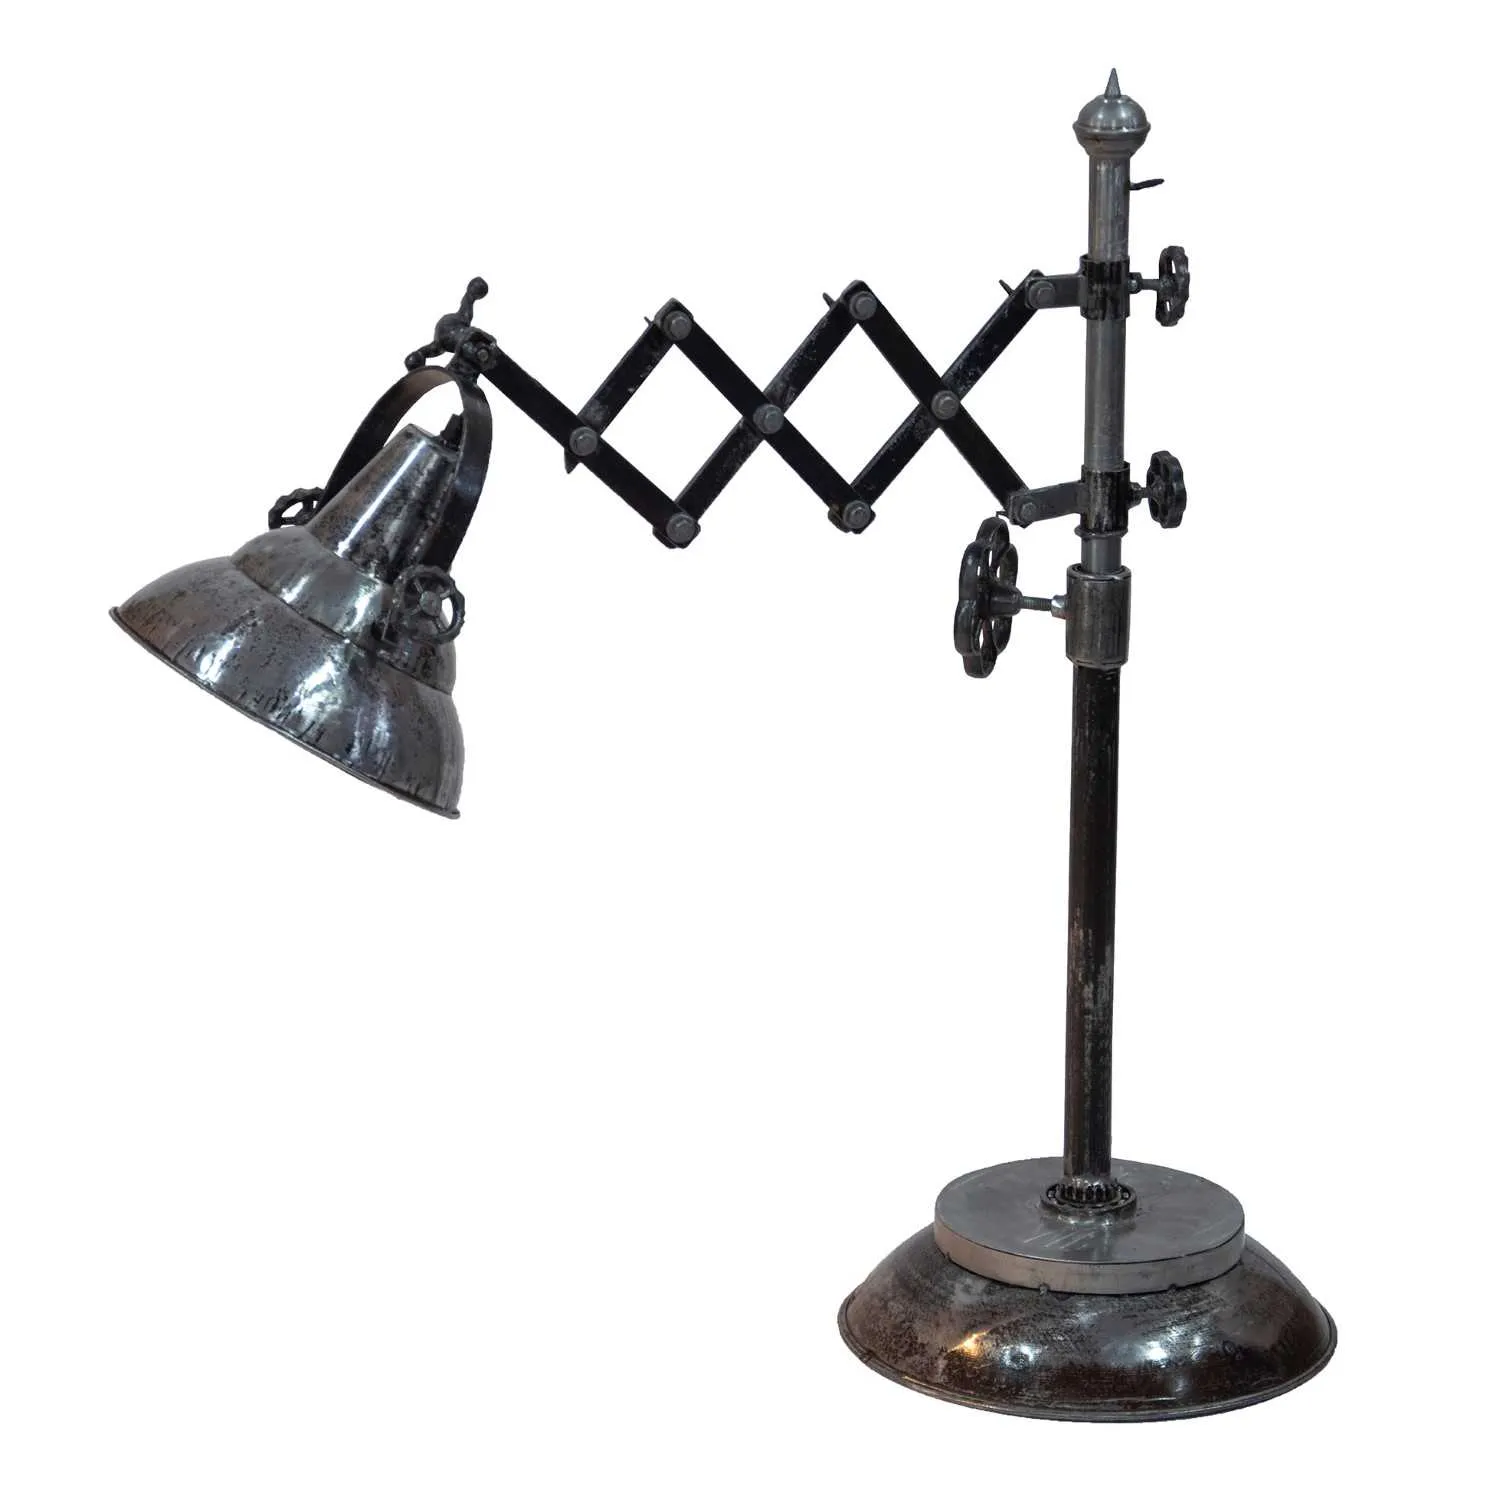 Upcycled Lighting And Furniture Reclaimed Iron Steampunk Theme Adjustable Table Lamp